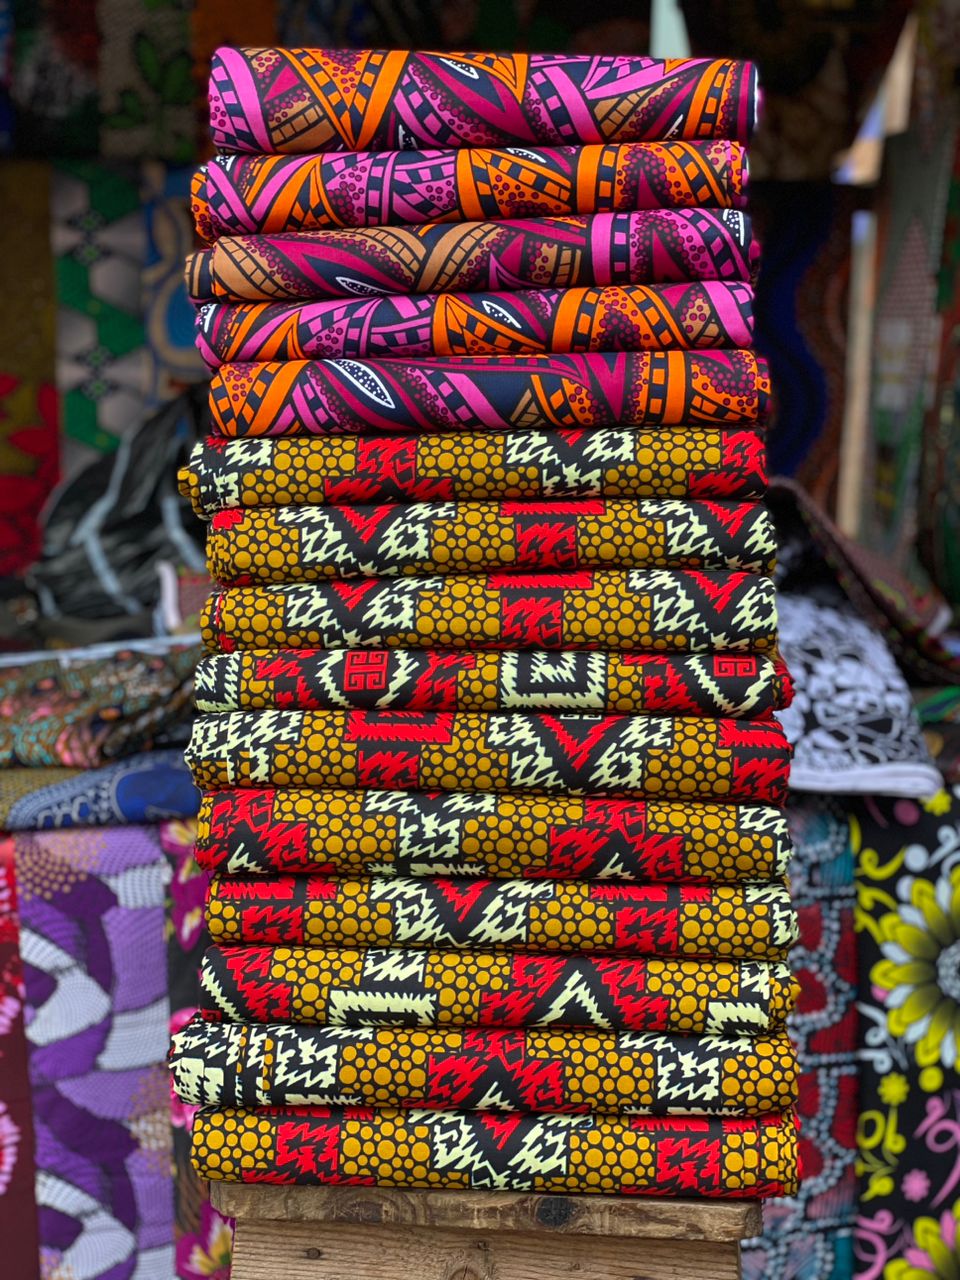 HOW TO CARE FOR AFRICAN PRINT CLOTHING